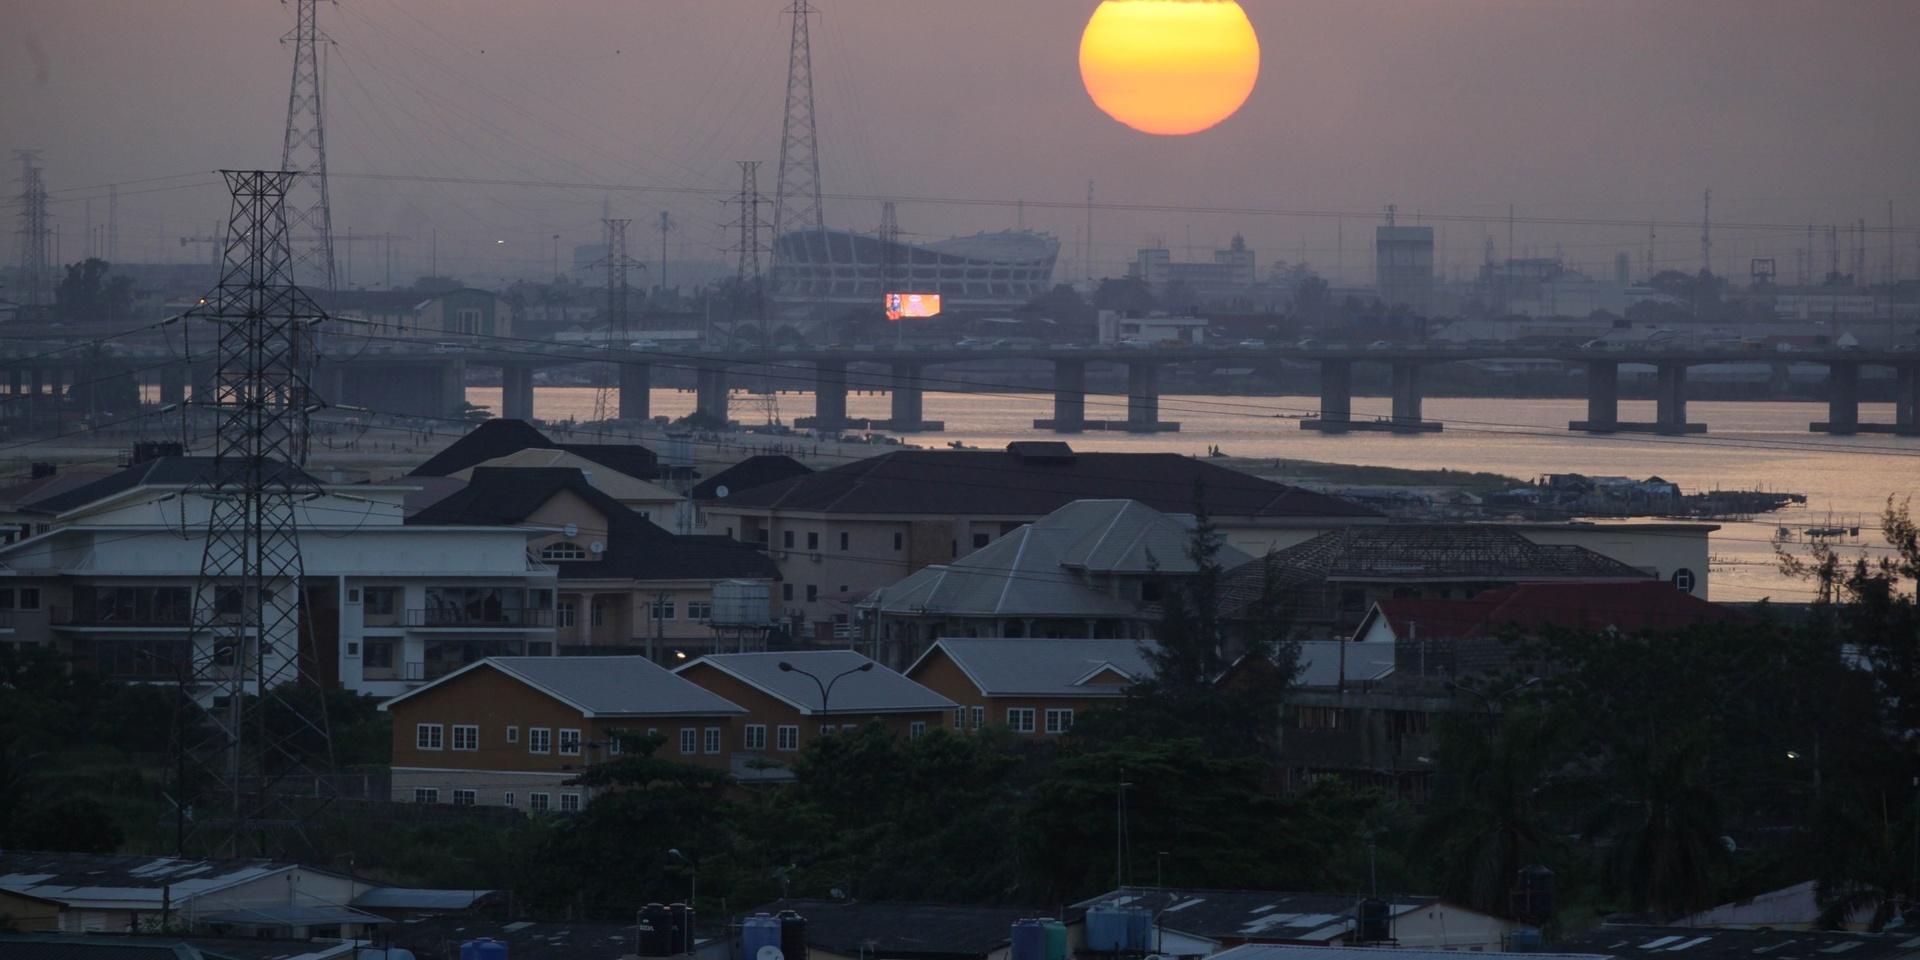 The sun sets over the National Theatre in Lagos, Nigeria, on Saturday, June 15, 2013. (AP Photo/Jon Gambrell)